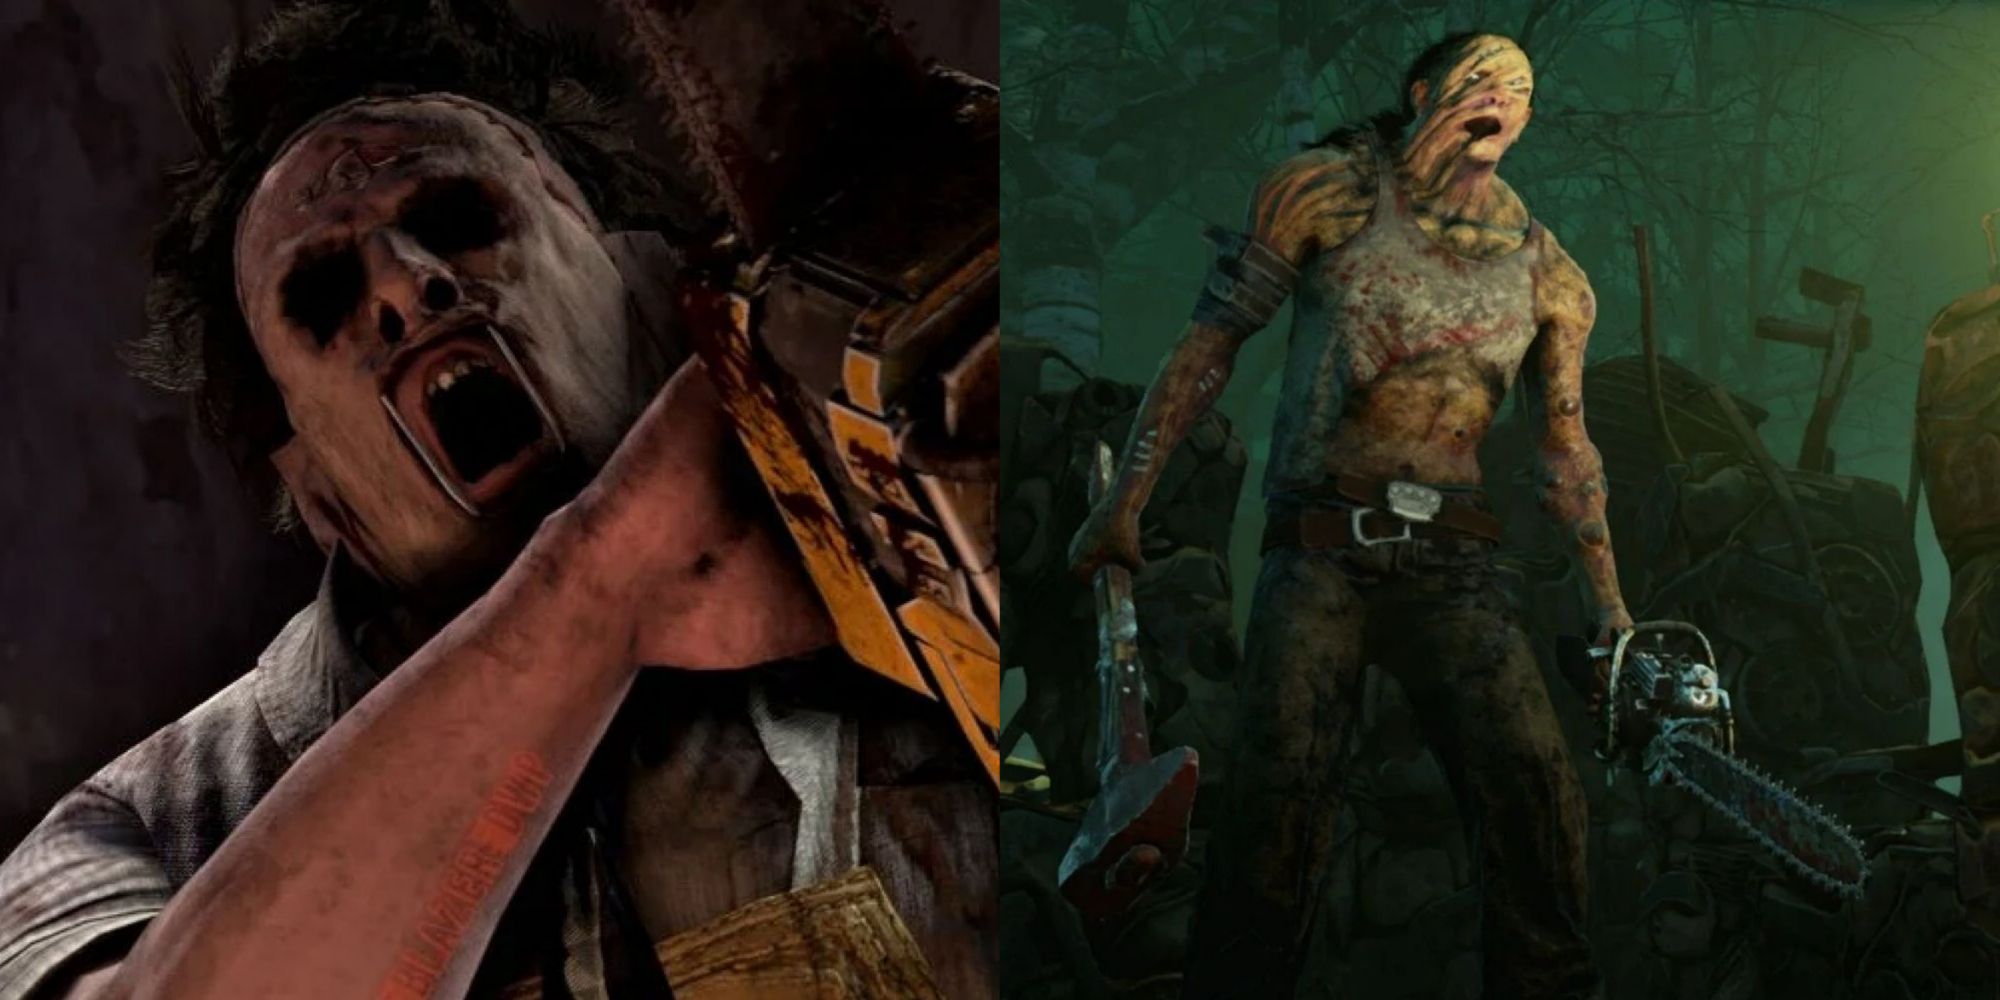 Dead By Daylight Shot of Leatherface and the Hillbilly